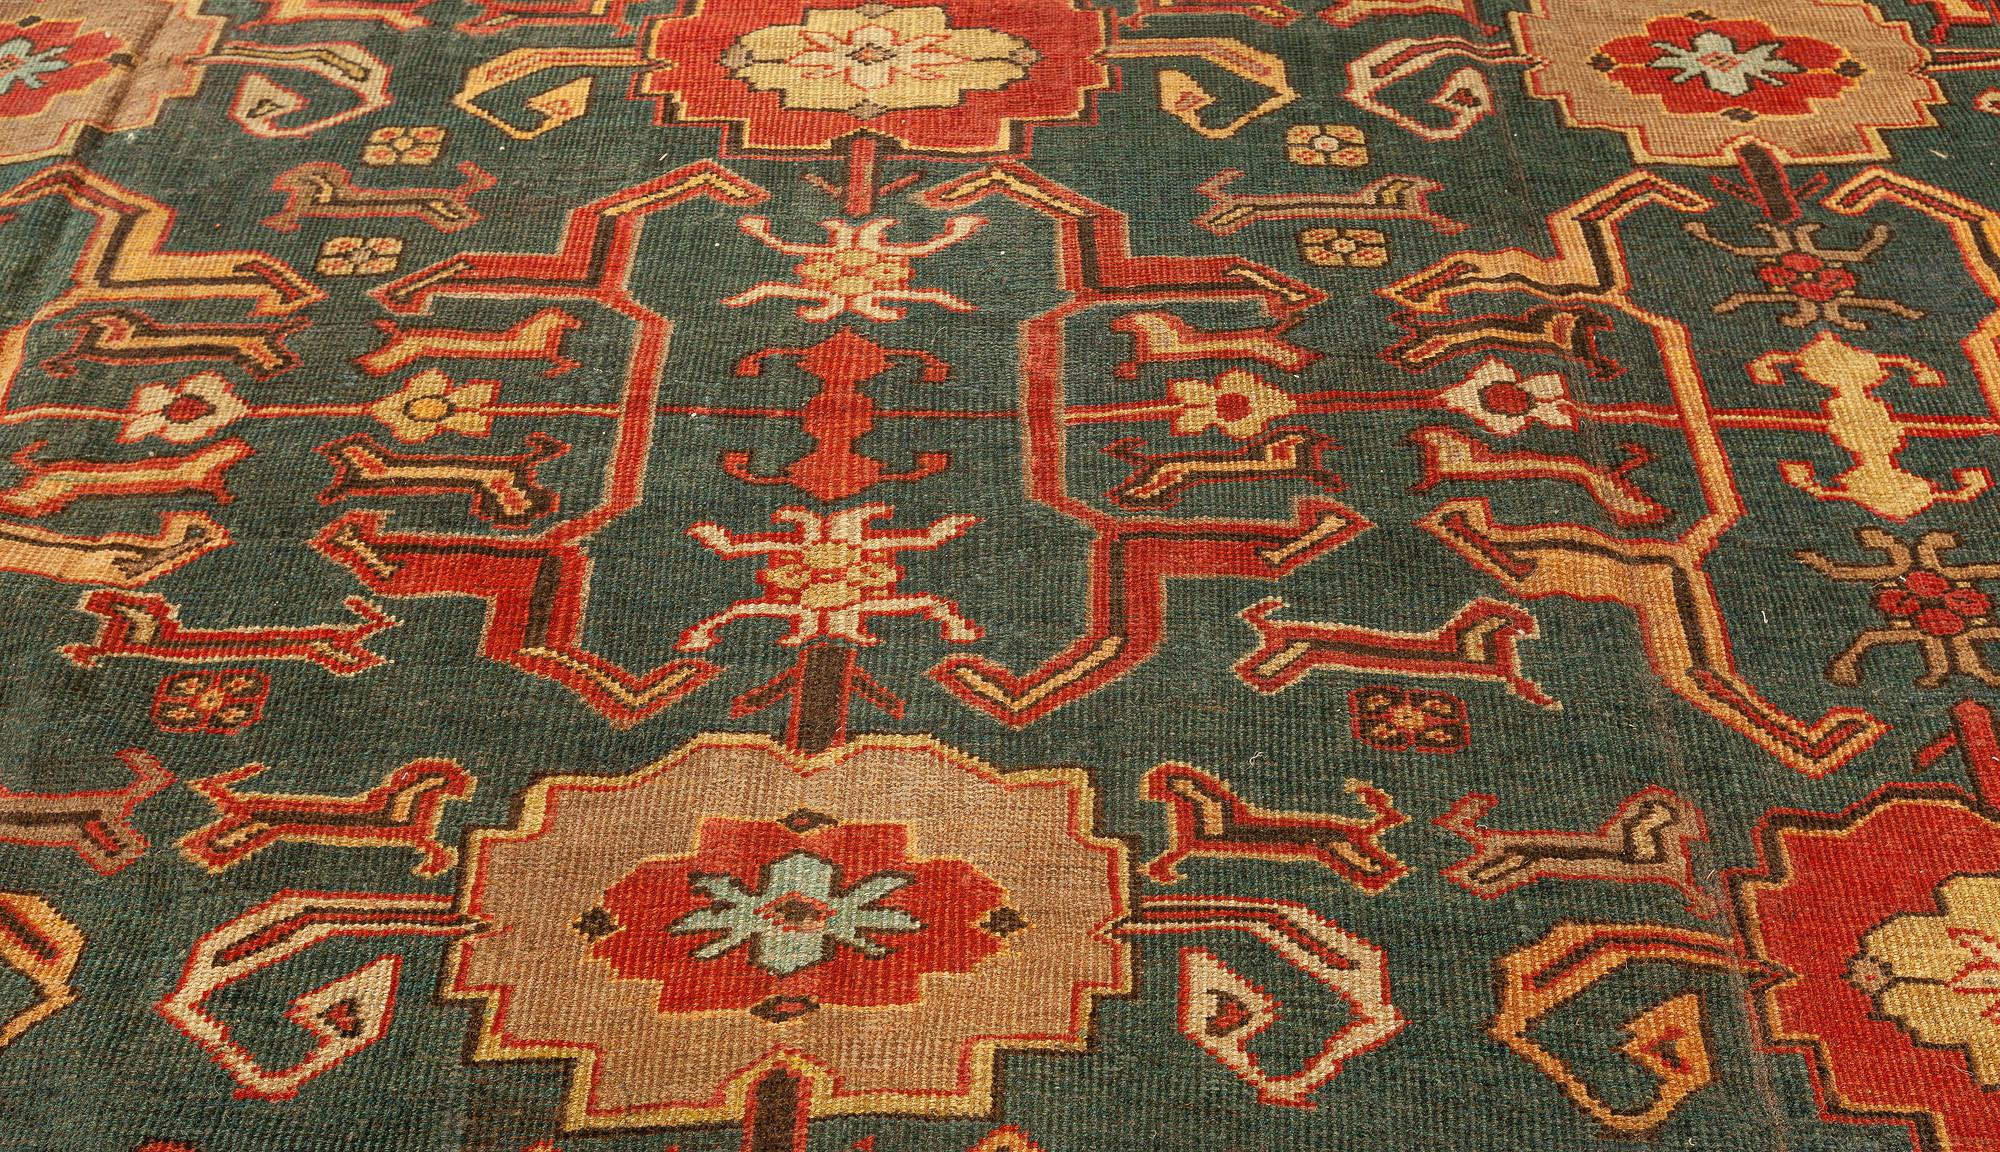 Fine Antique Persian Sultanabad Red Handmade Wool Rug
Size: 11'2